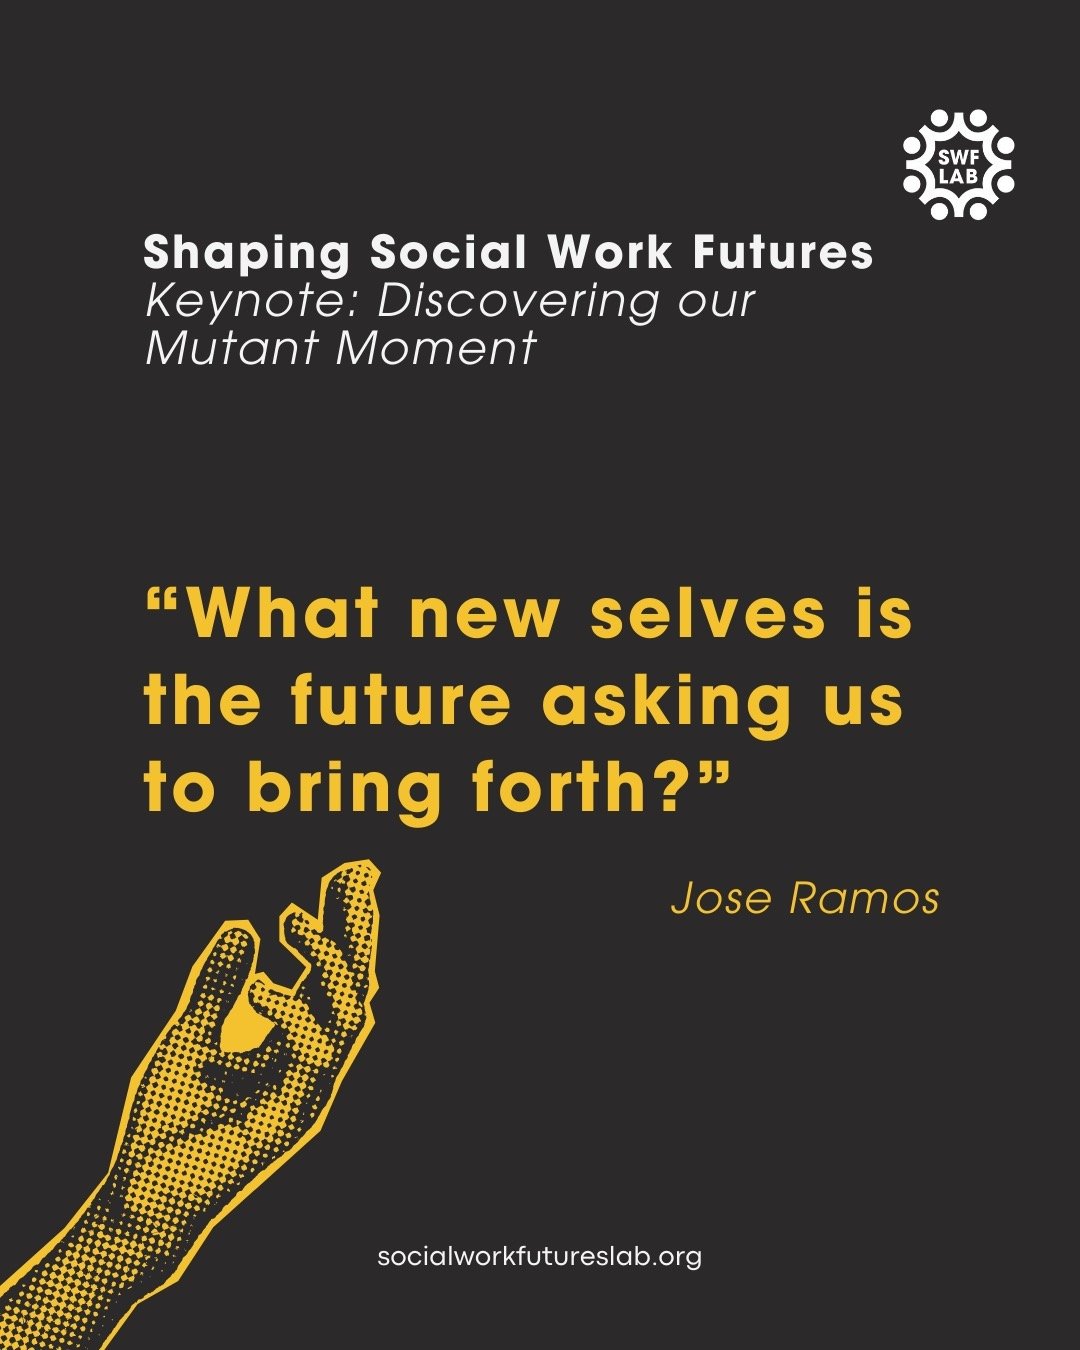 We are heading into the week thinking deeply about this quote from Jose Ramos @ actionforesight.net 
#SWFutures #anticipatorySW #thefutureiscoming #mutantmoment